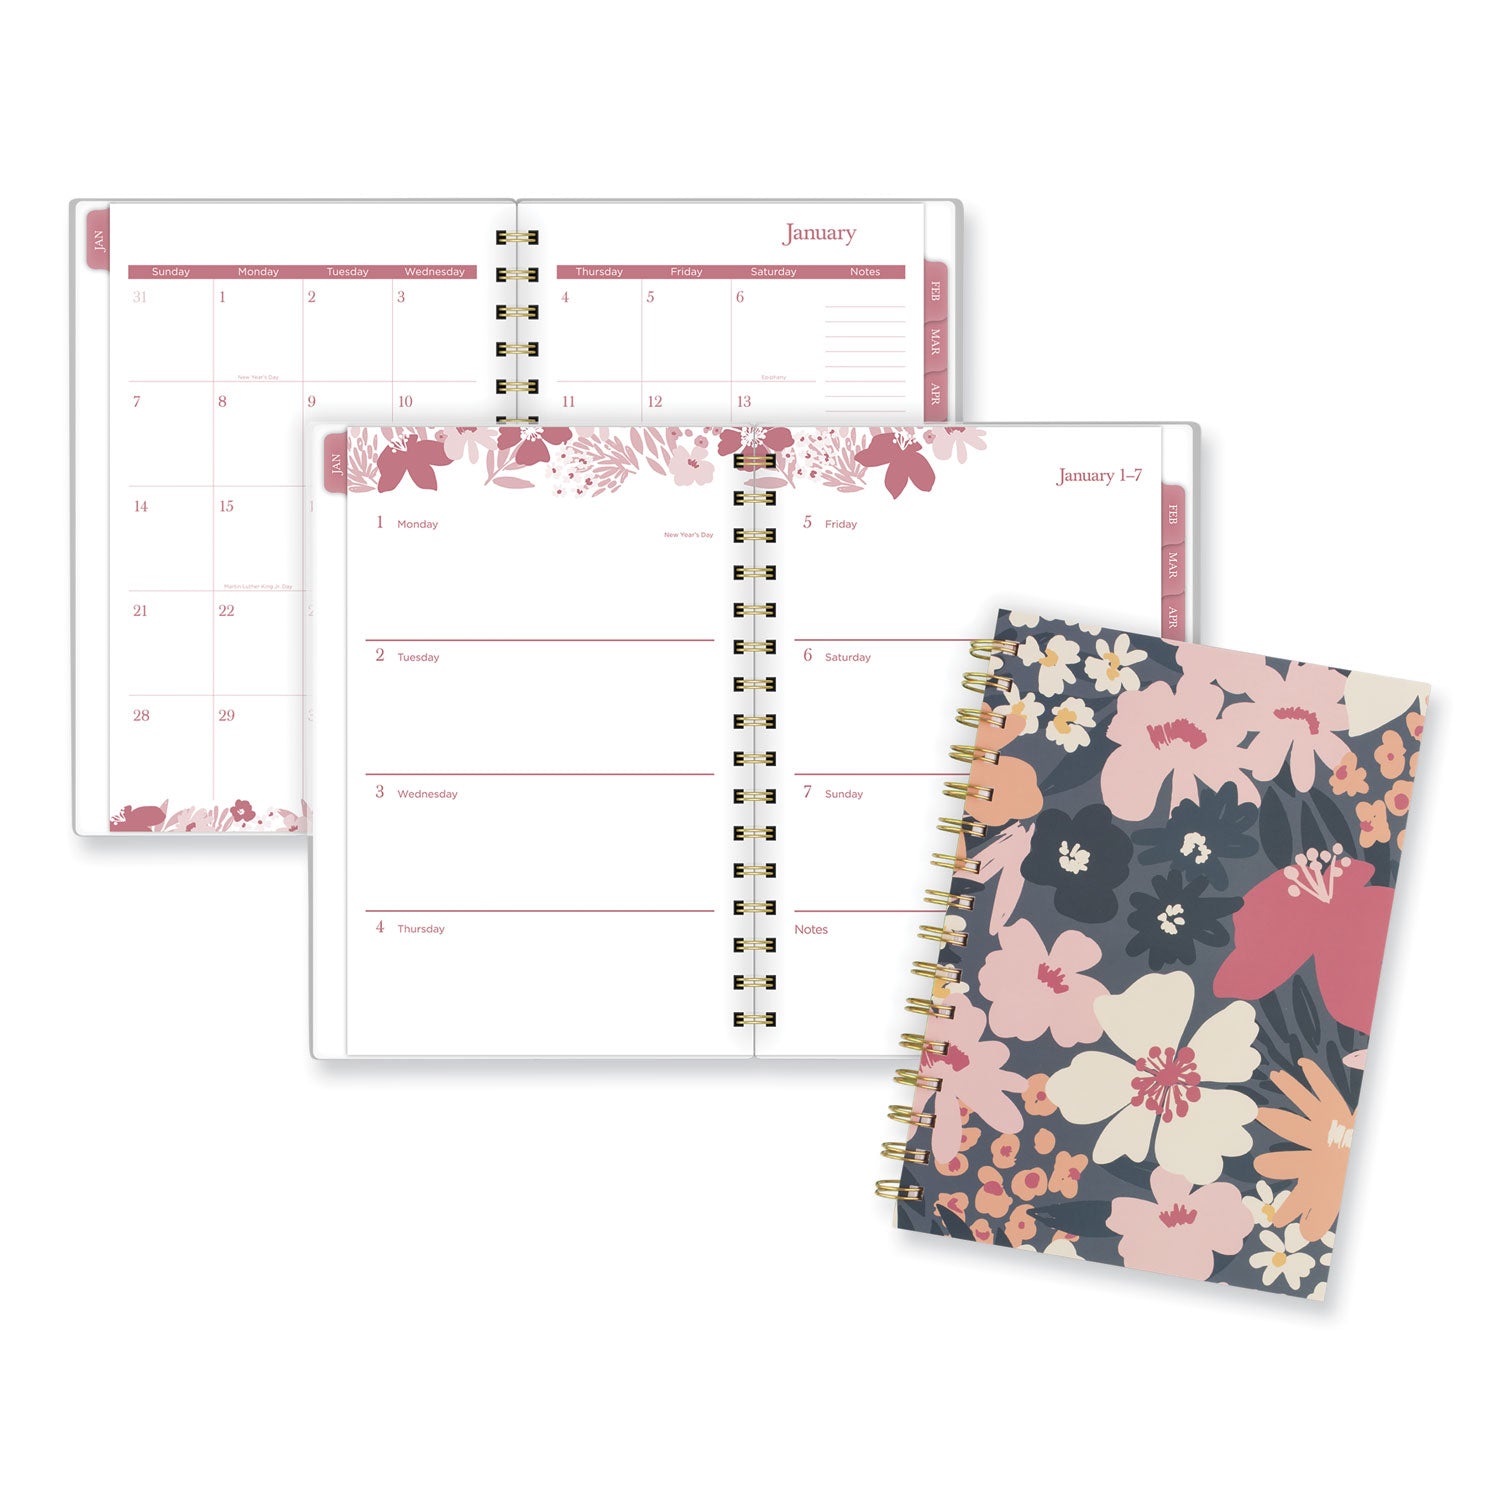 Cambridge Thicket Weekly/Monthly Planner - Small Size - Weekly, Monthly - 12 Month - January 2024 - December 2024 - 5 1/2" x 8 1/2" Sheet Size - Wire Bound - Multi - To-do List, Durable, Flexible, Snag Resistant, Double-sided Pocket, Dated Planning P - 1